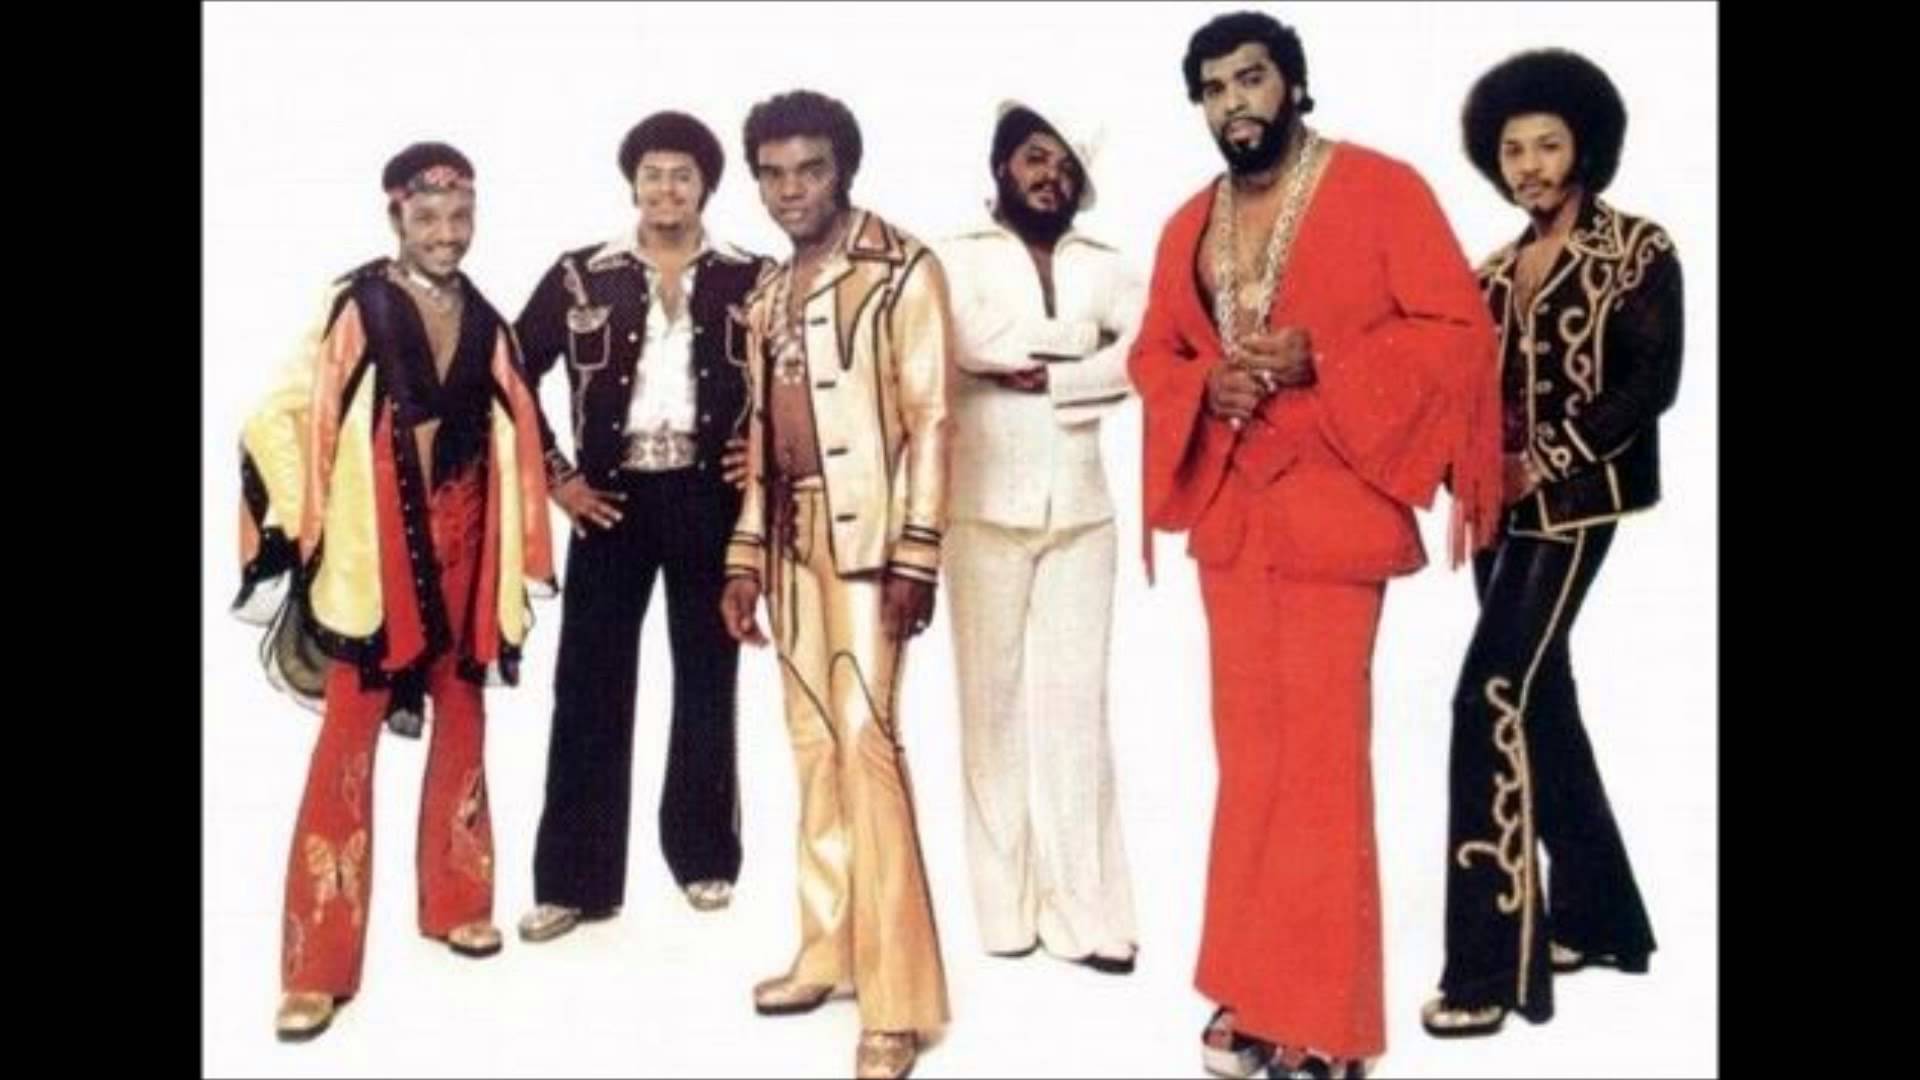 Mario’s Magic Mixtape: Featuring The Isley Brothers & Donald Byrd, the Blackbyrds Mini Concert (10-27-17)